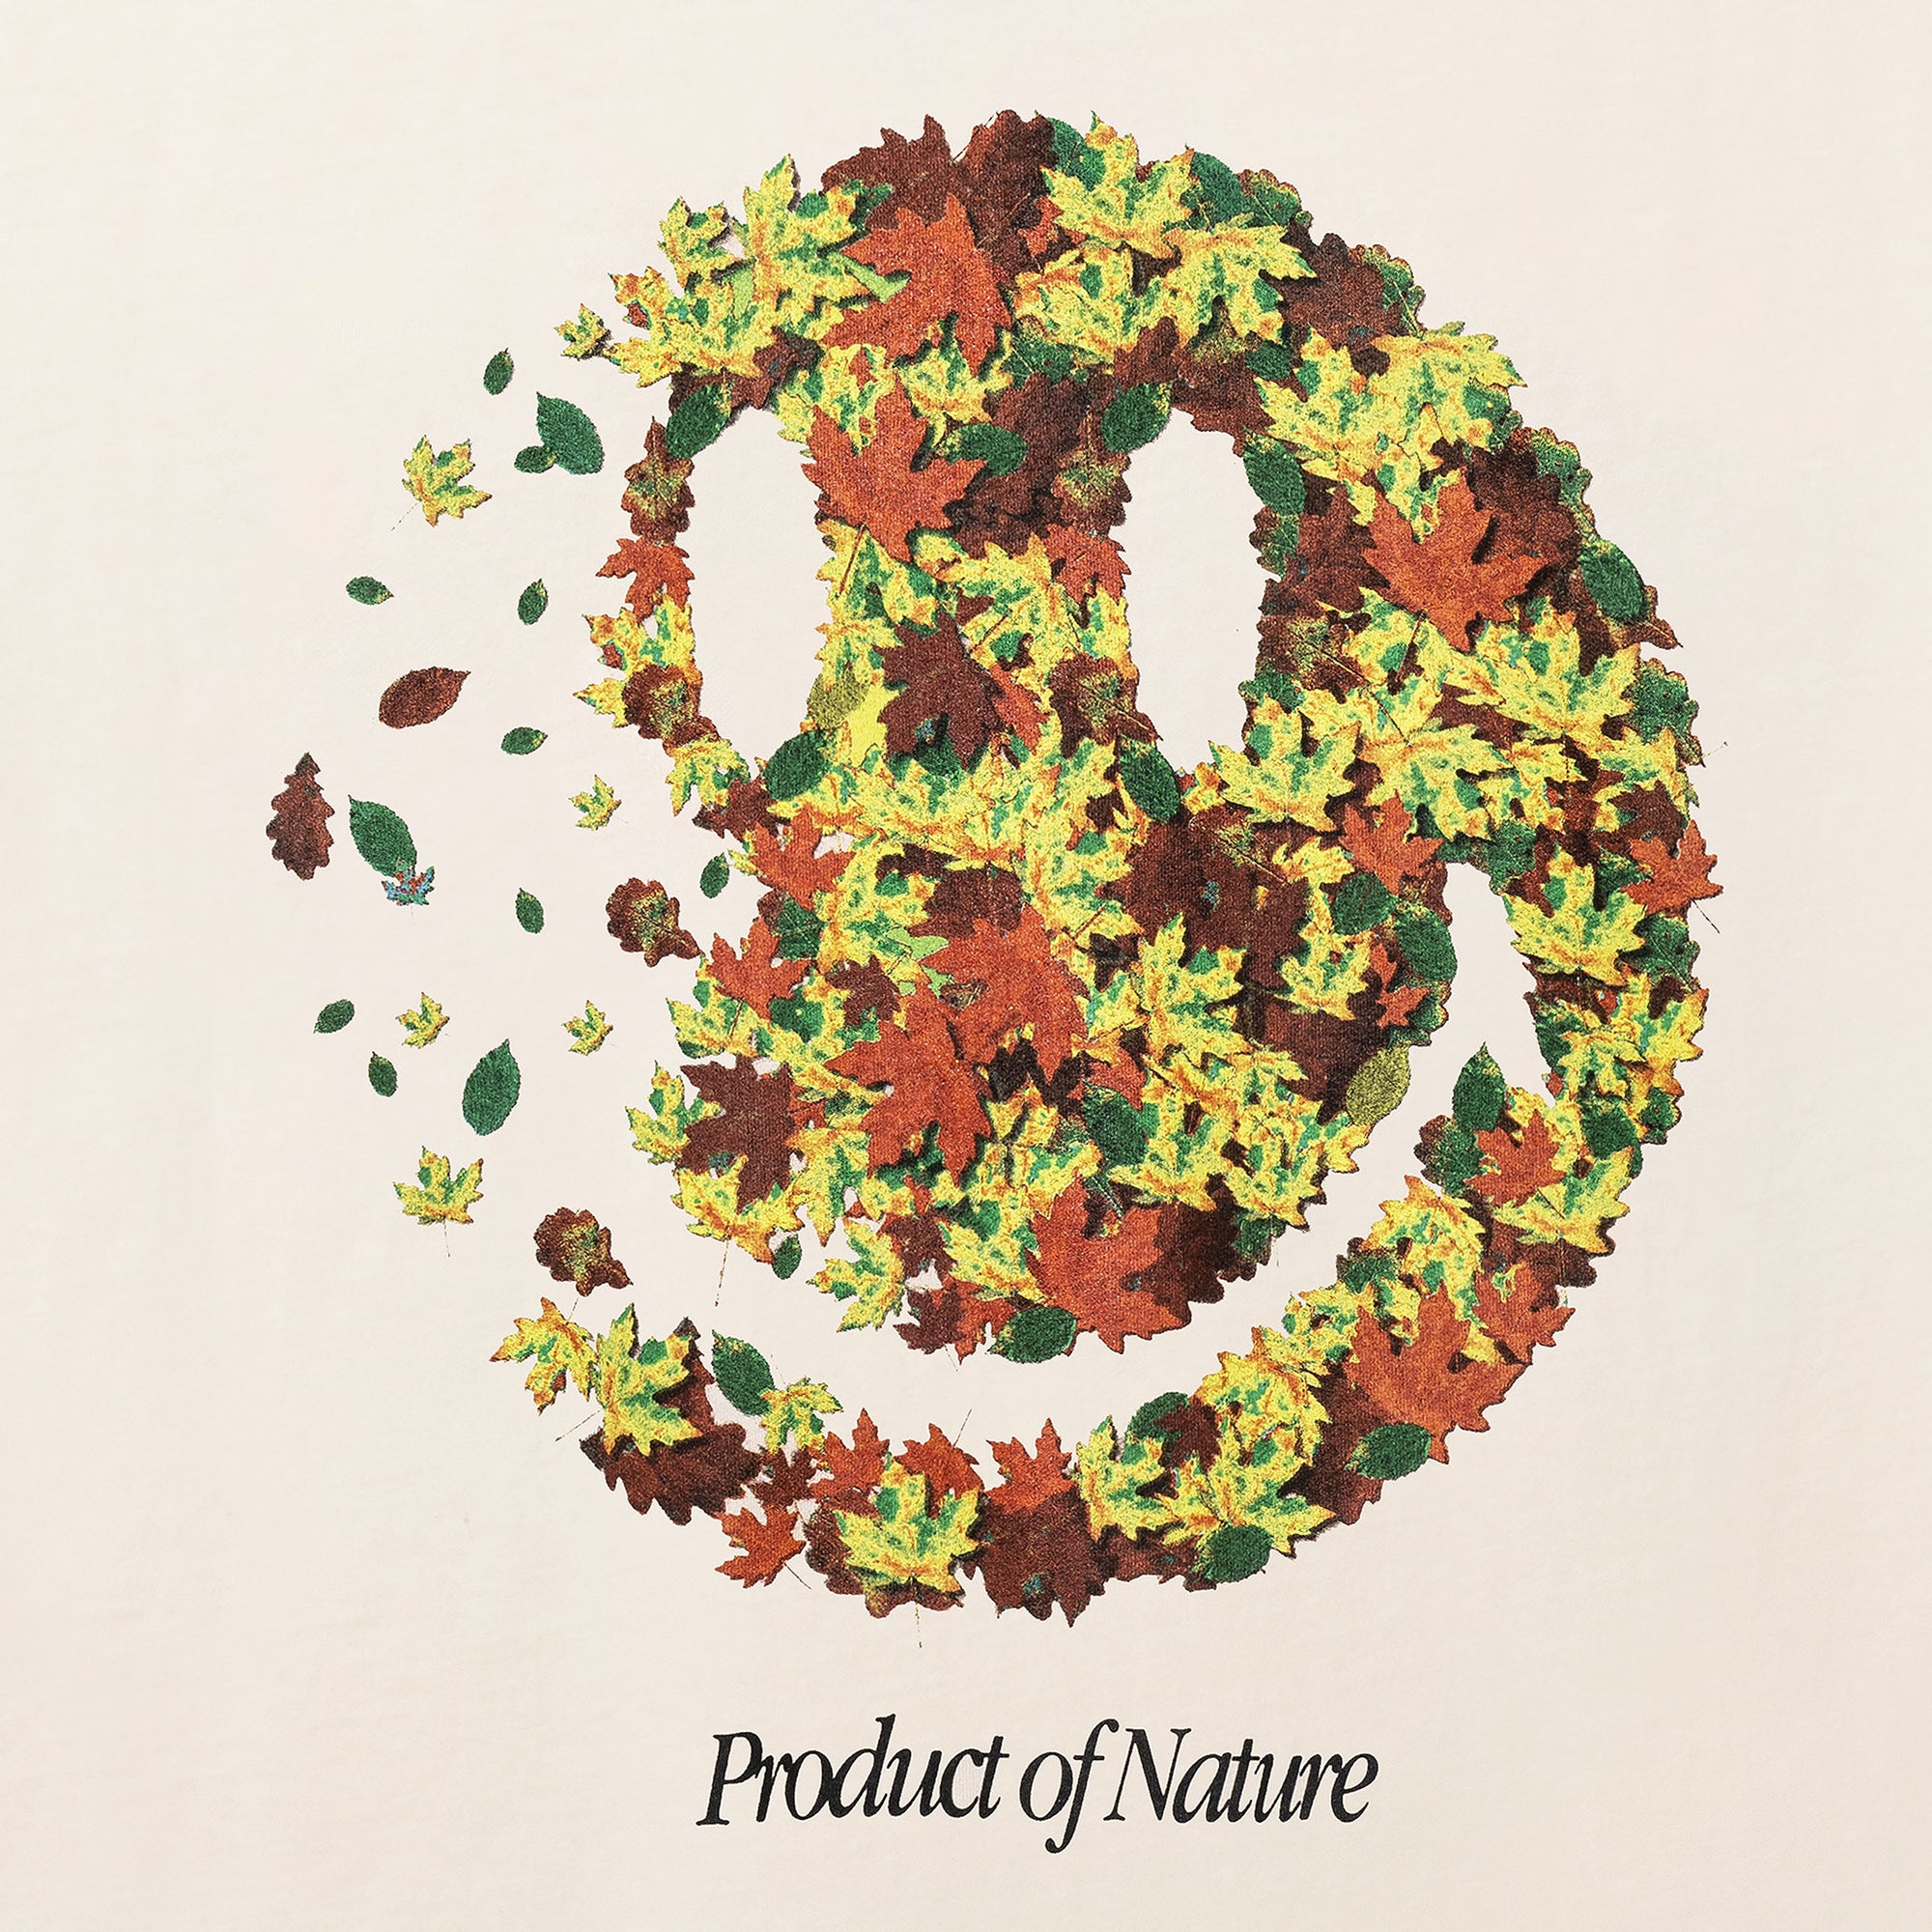 Market Smiley Product Of Nature T-Shirt (ecru) - Blue Mountain Store